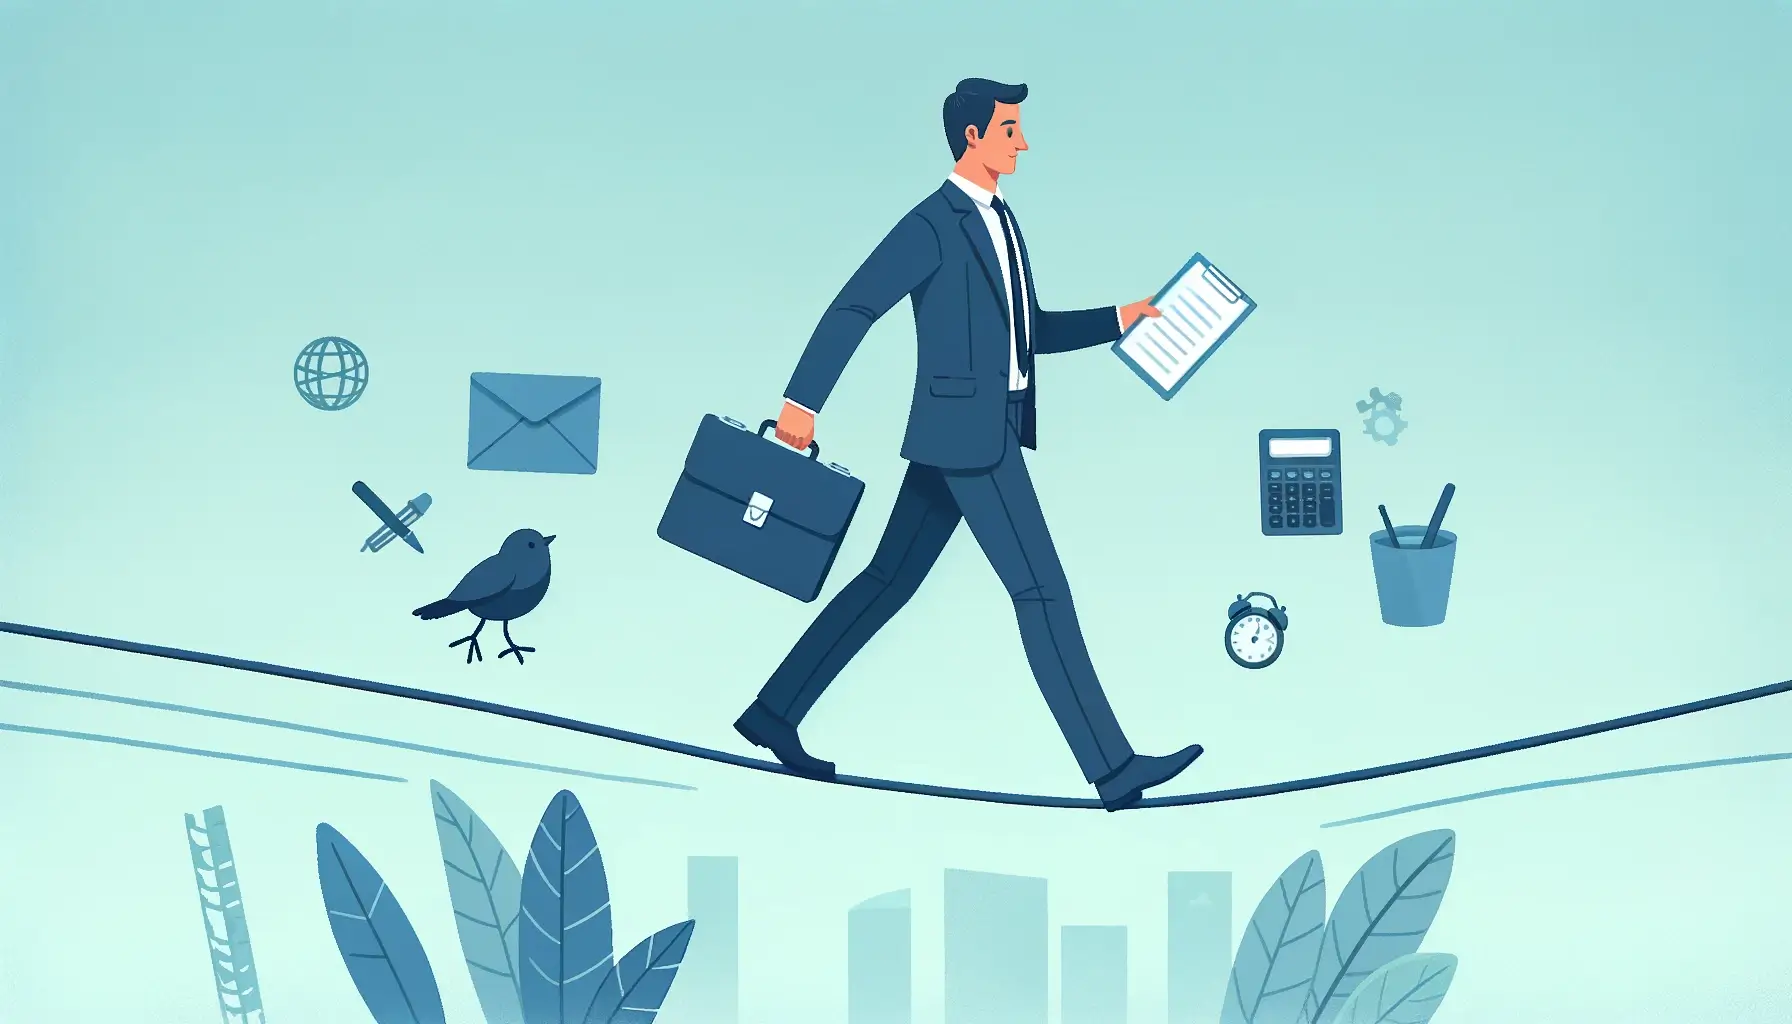 Graphic of a male entrepreneur balancing on a tightrope, with icons of professional responsibilities on one side and personal life on the other. This image captures the challenges many entrepreneurs face in managing their own business, balancing the risks and rewards in small business entrepreneurship, and juggling the demands of economic development with personal commitments.